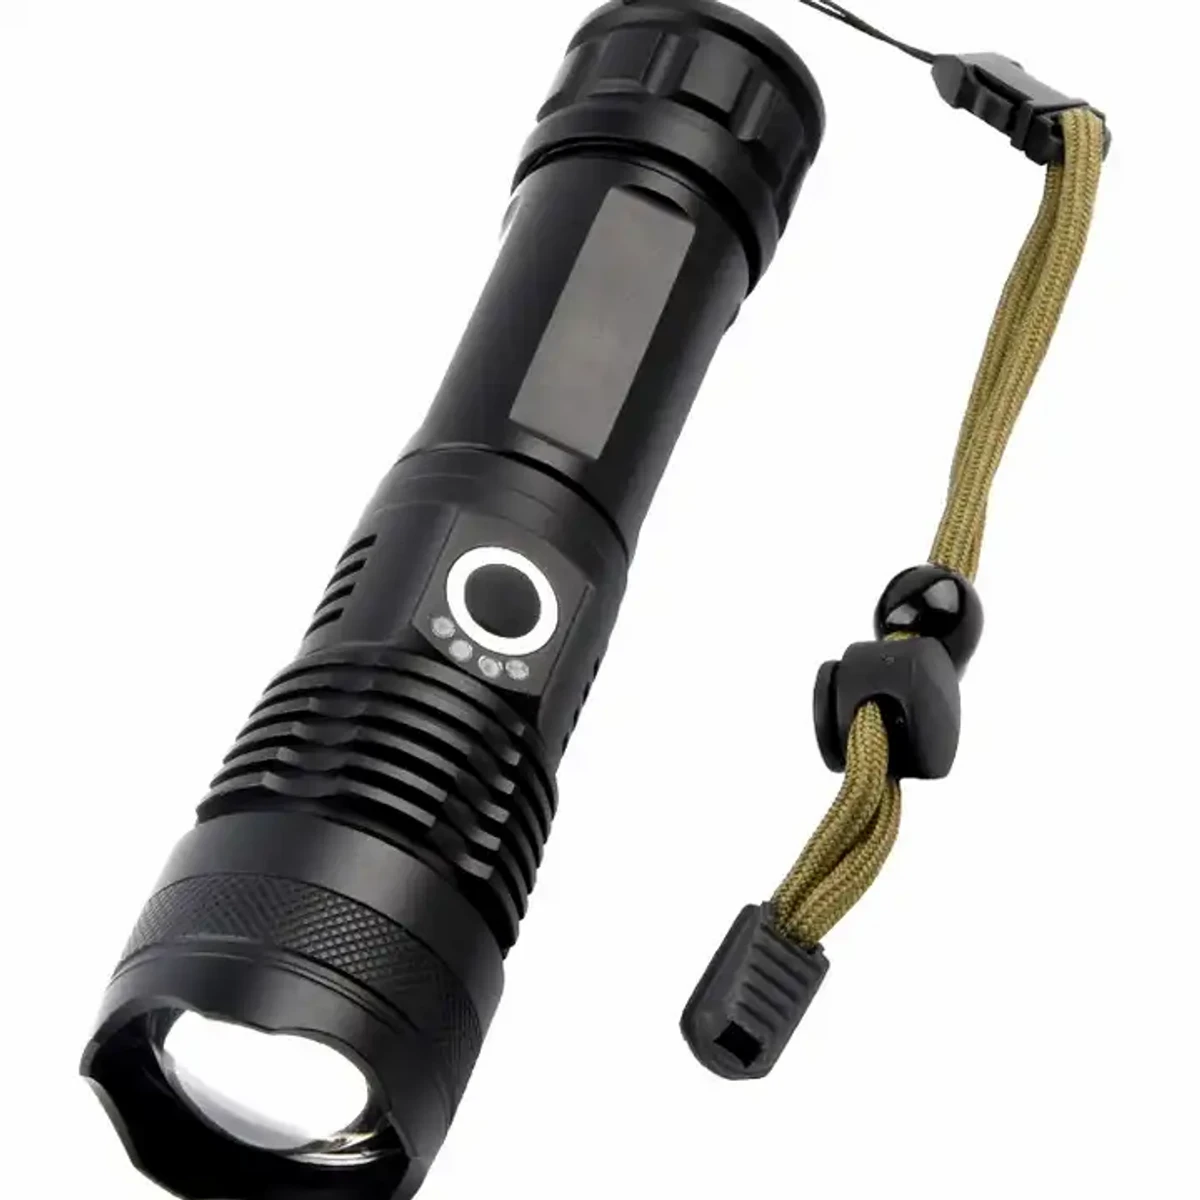 Rechargeable Waterproof Zoom LED Flashlight USB Torch Light (XHP 50)